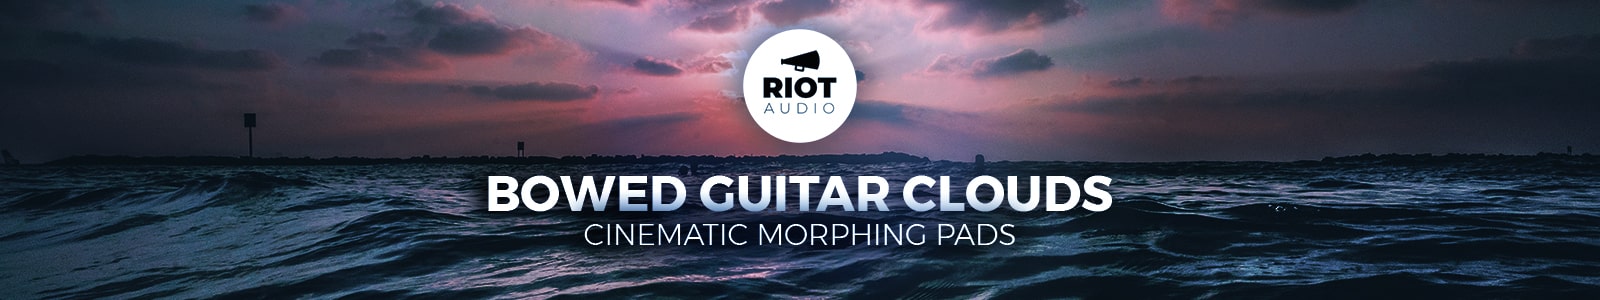 bowed guitar clouds by riot audio